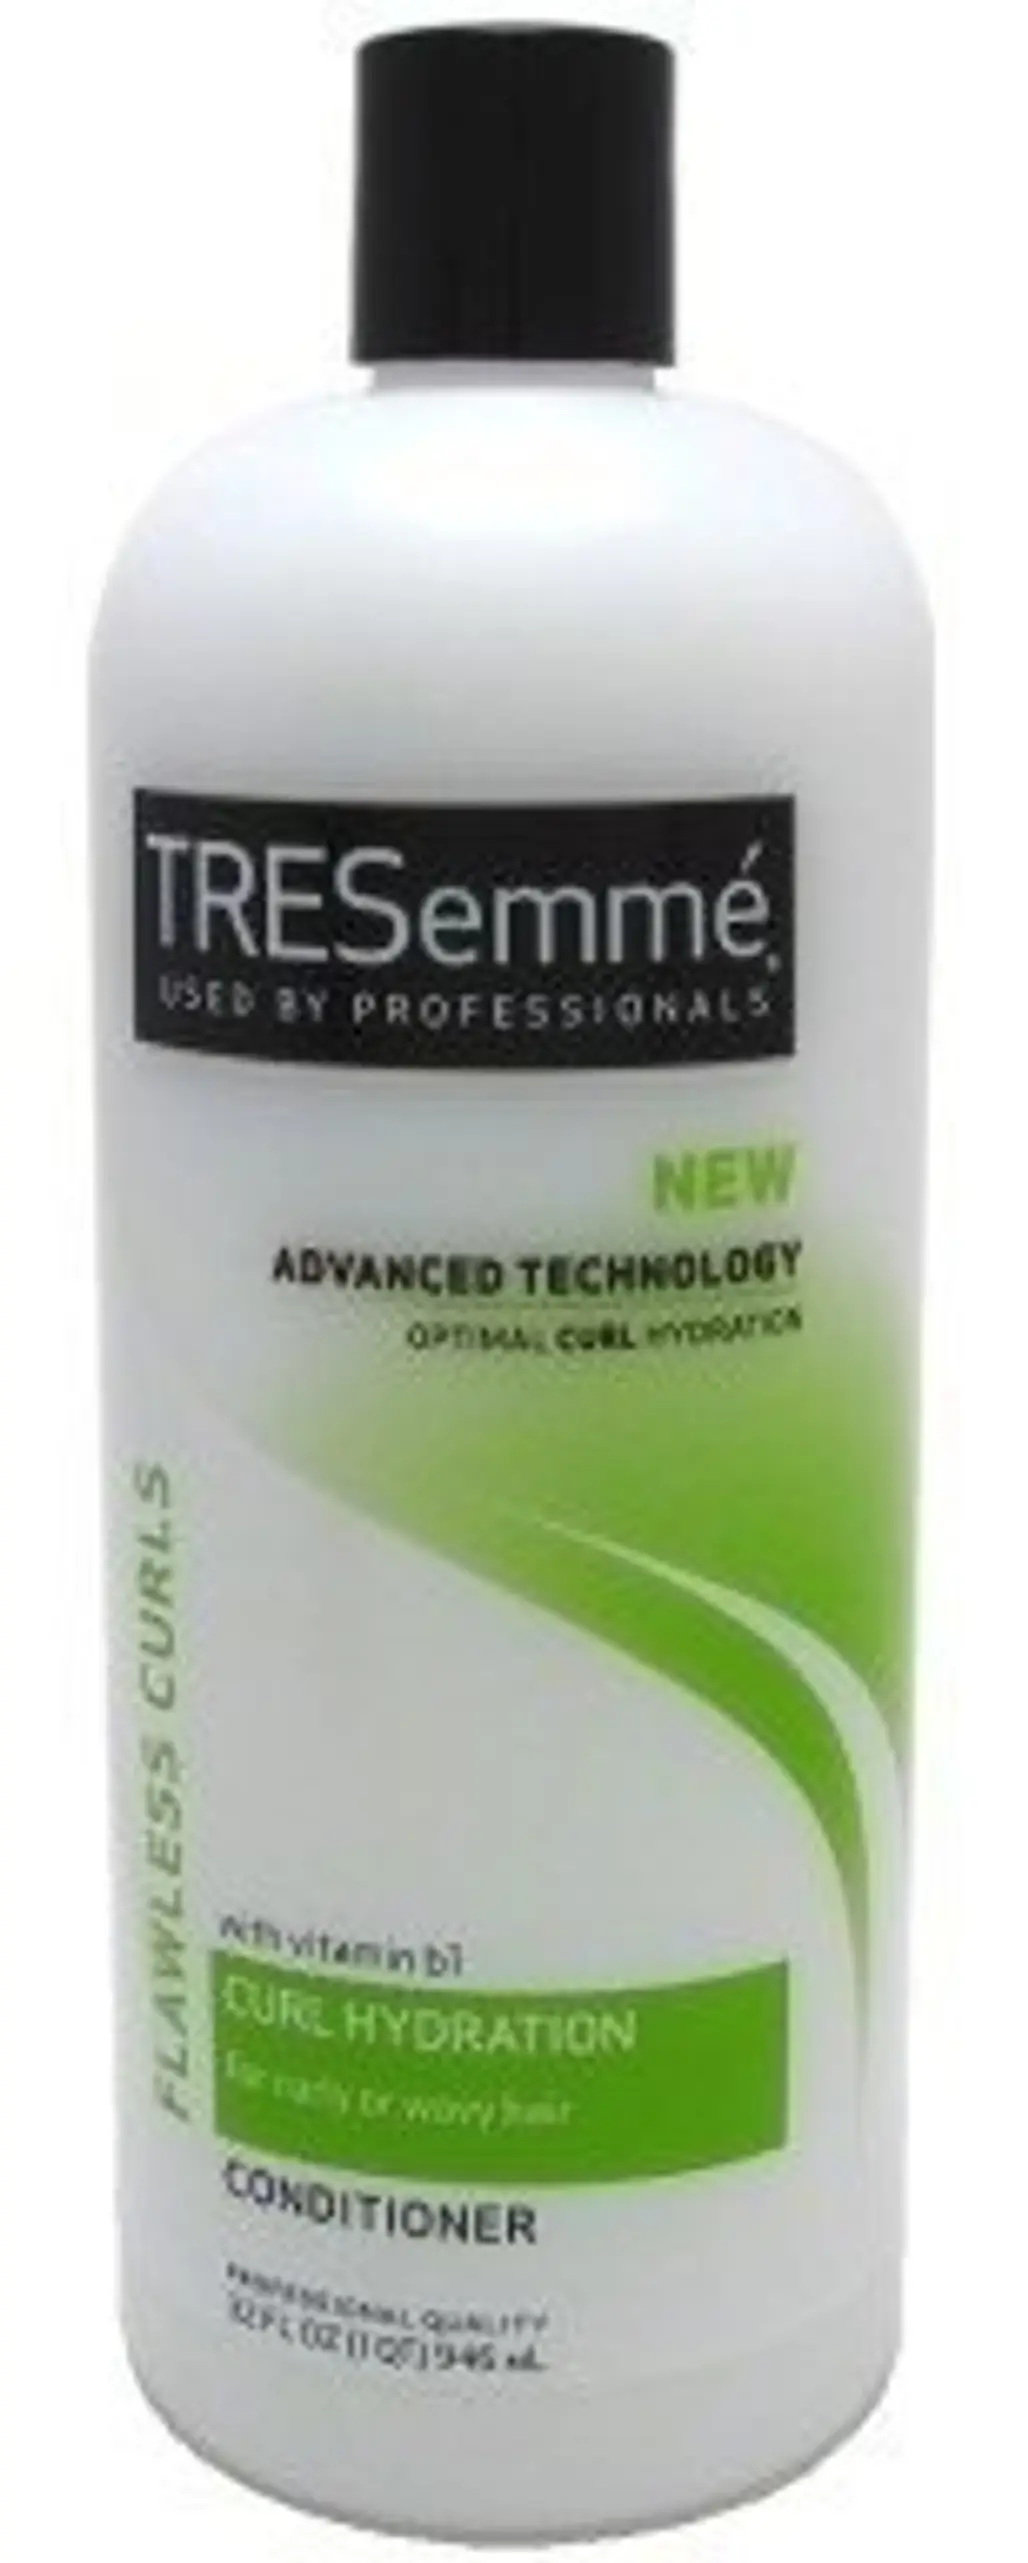 Tresemme FLAWLESS CURLS CONDITIONER